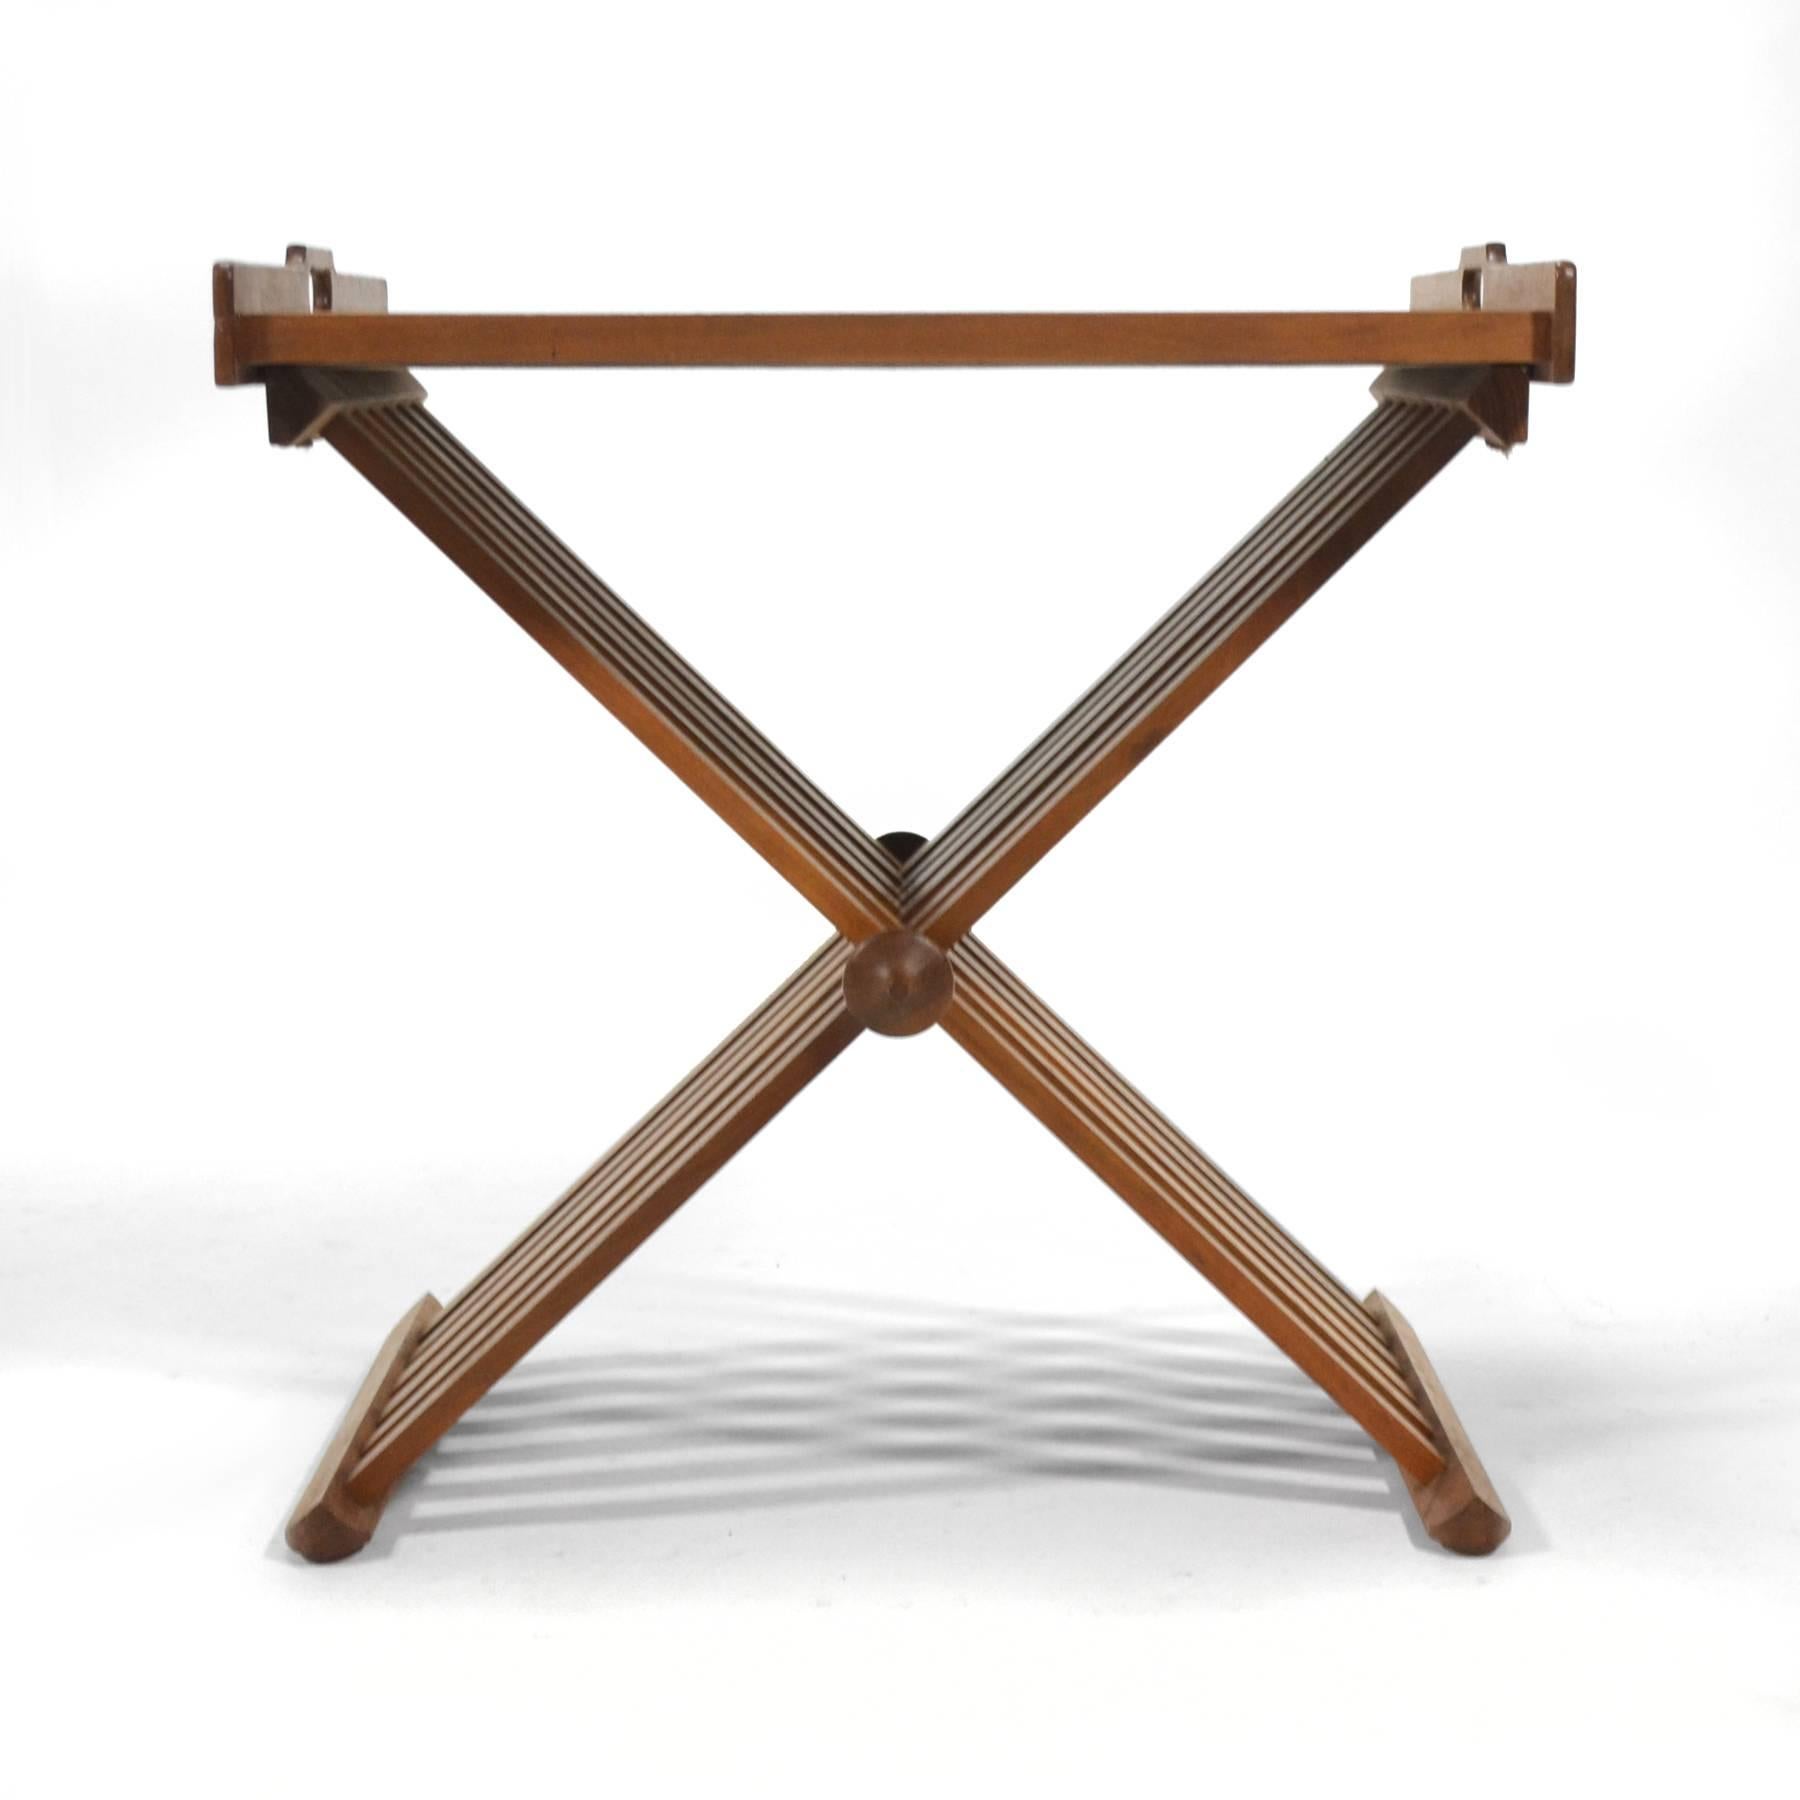 This wonderful, highly functional table by Stewart/ McDougall was part of their 